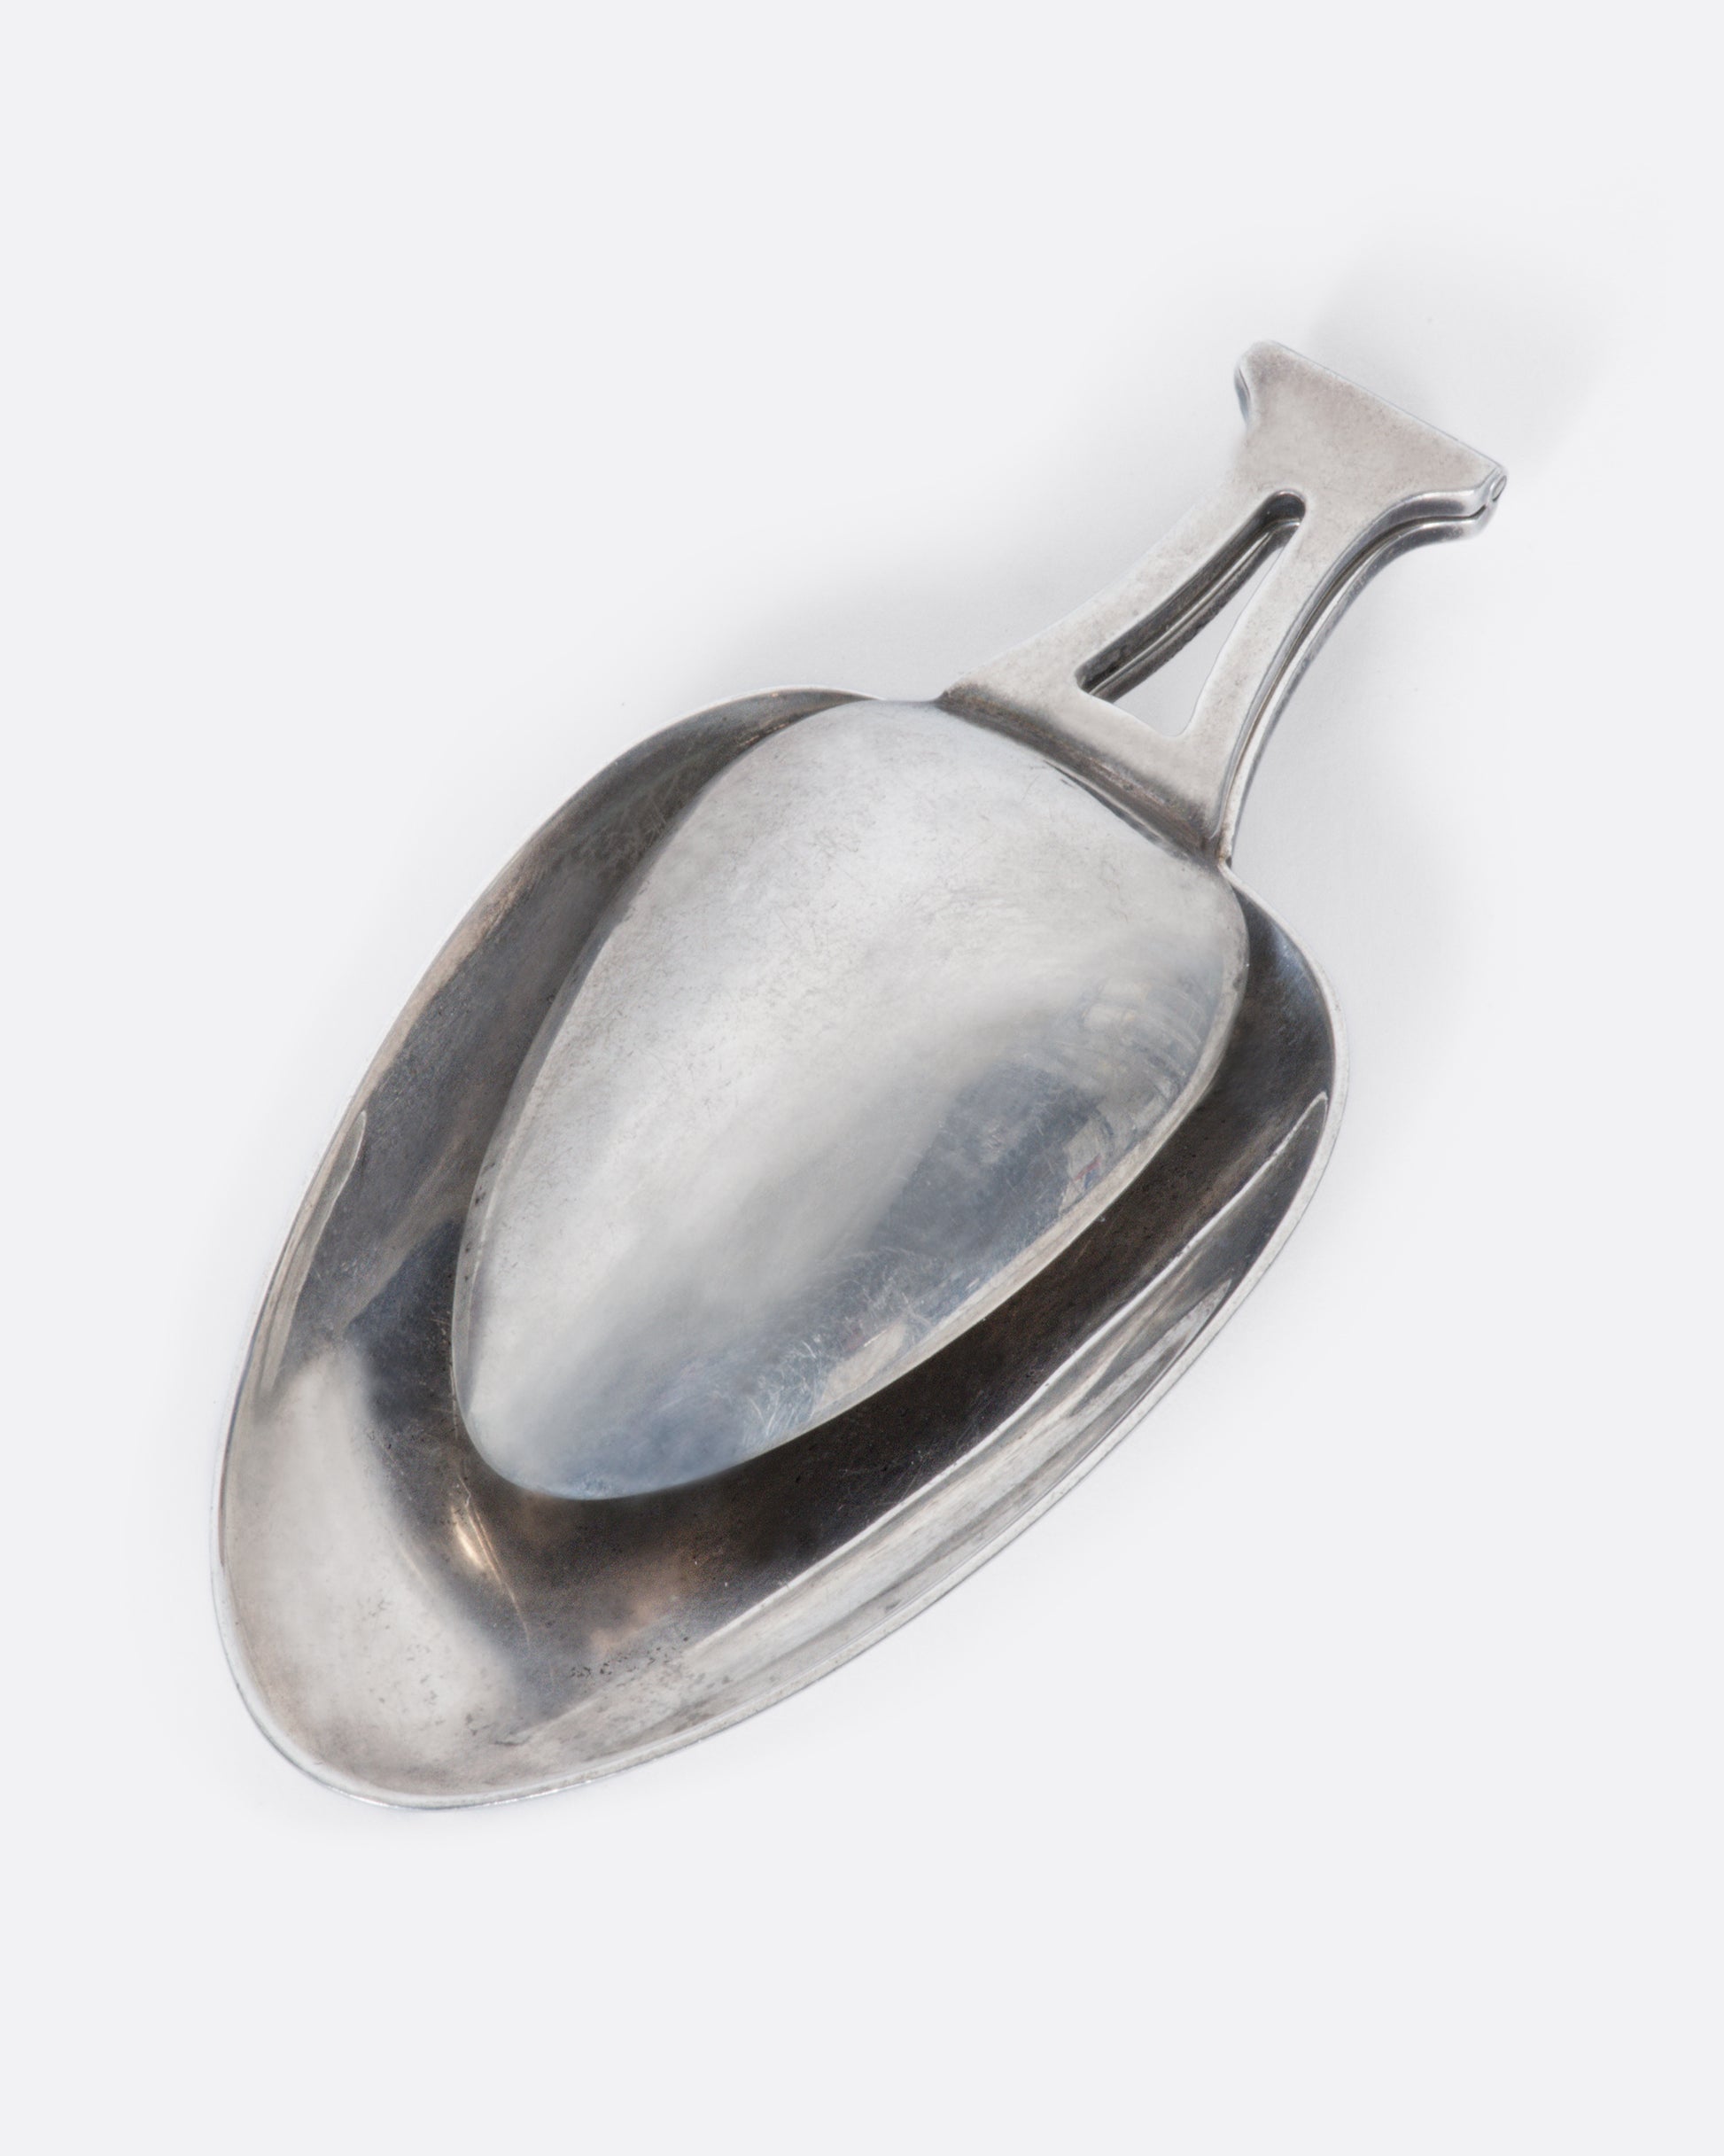 A sterling silver folding spoon with a teaspoon on one side and a tablespoon on the other.